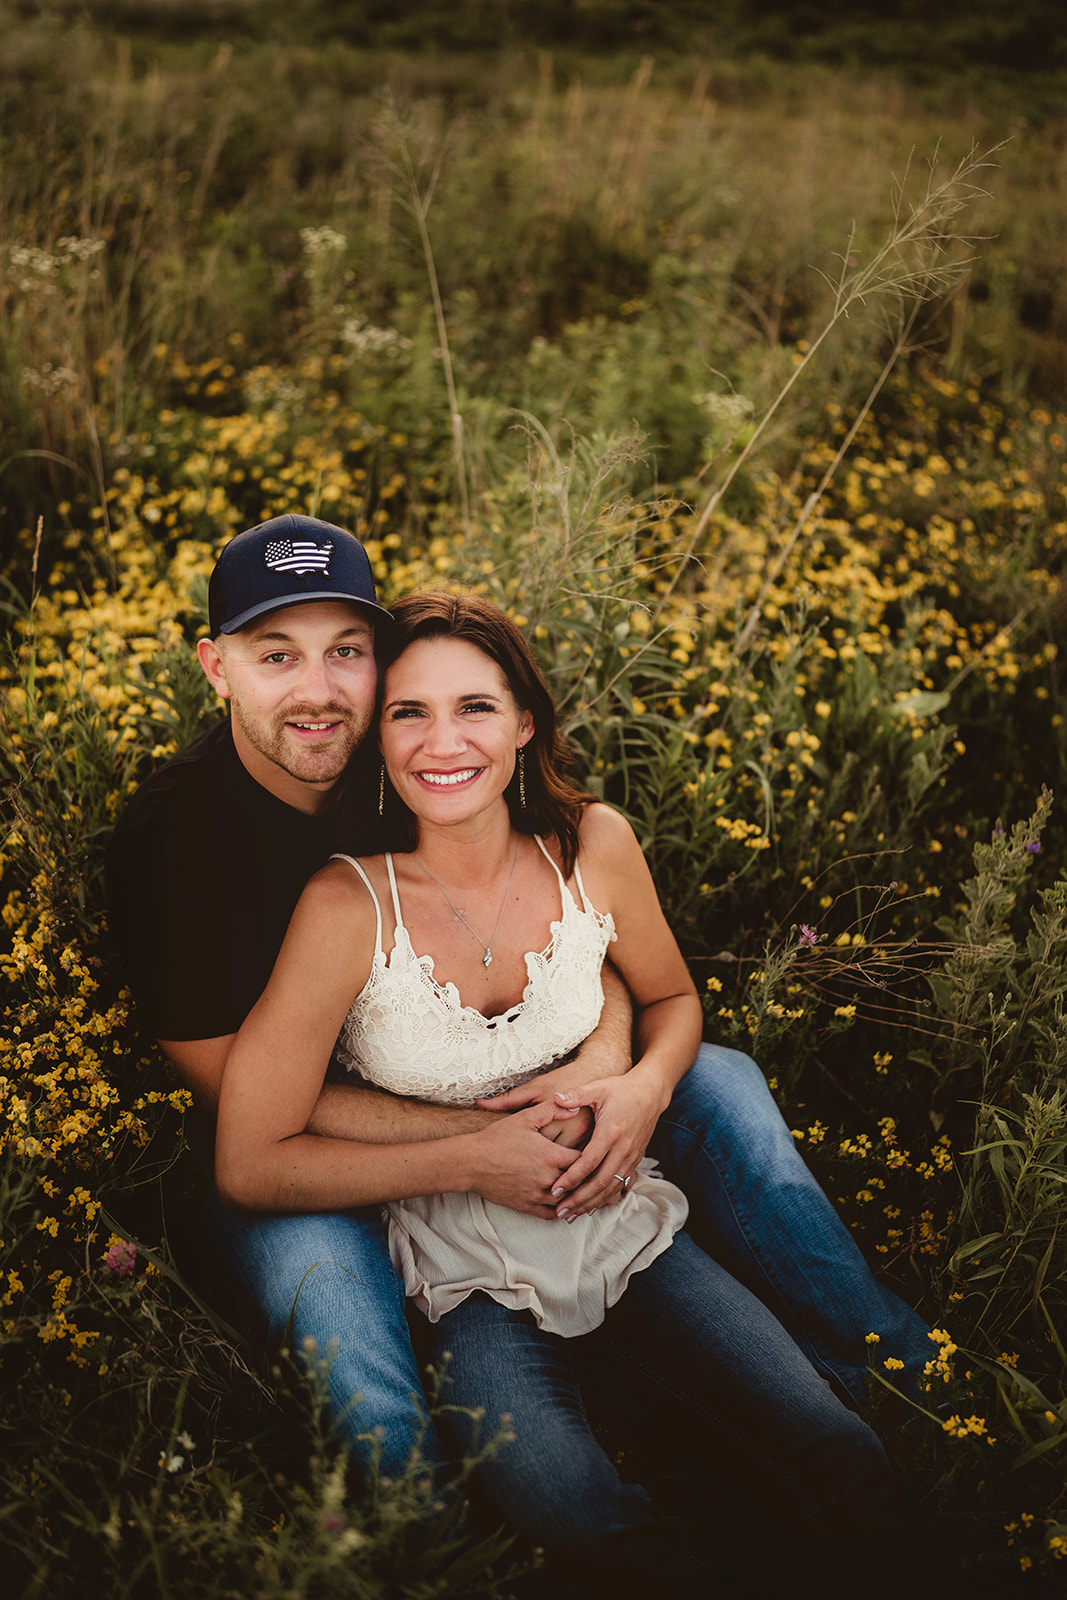 A happy engaged couple snuggles close, smiling at the camera amidst a beautiful flower field.